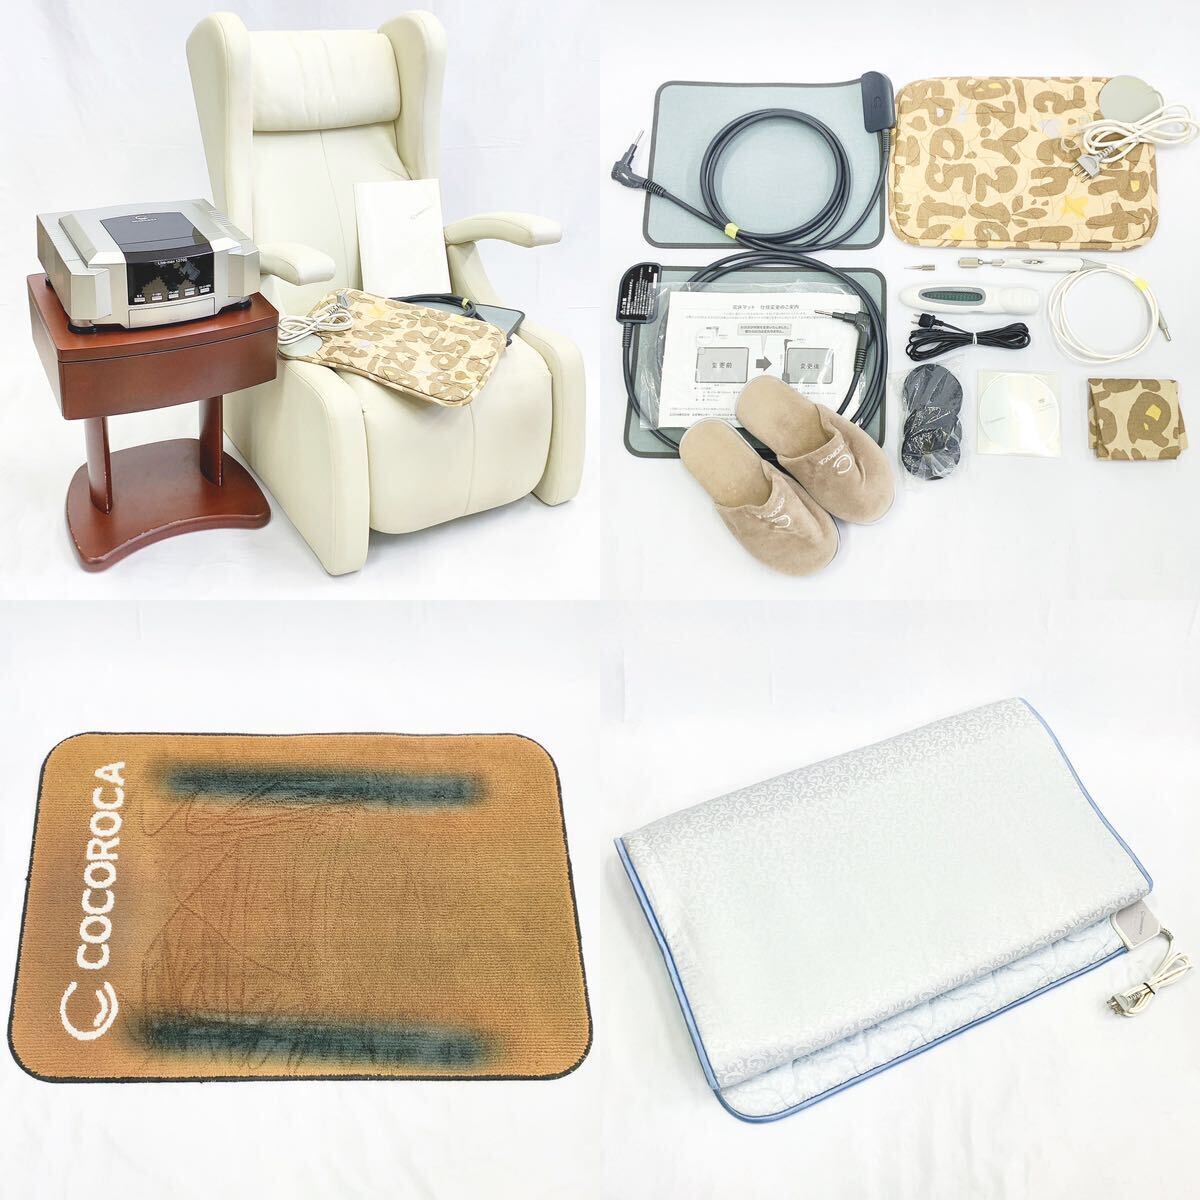  beautiful goods operation goods here ro Carib Max 12700 First Class high class static electricity therapy apparatus exclusive use reclining attaching accessory great number addition photograph equipped 05-0405*